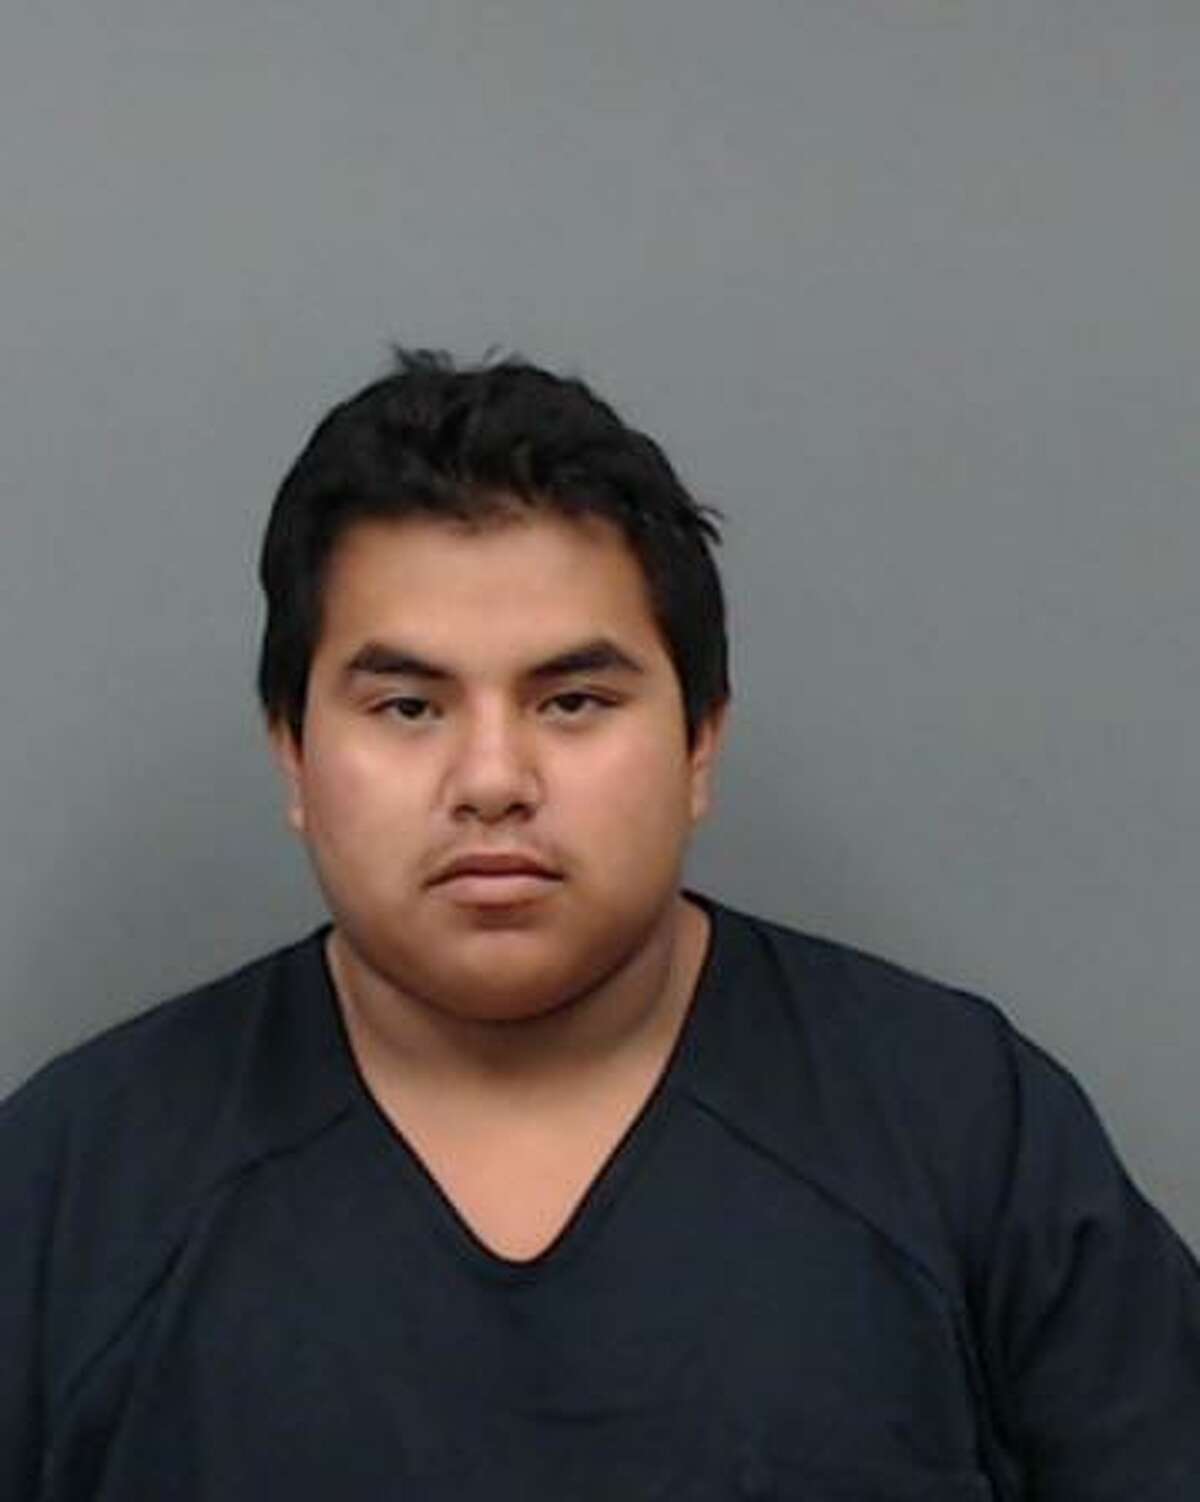 John Dominic Coronado, 19, is one of six people, including four juveniles, charged with capital murder in the death of Kevin Yankovoy, 18. Yankovoy was fatally shot at an apartment complex on Dec. 9, 2019, in the 1100 block of Leah Avenue, according to the San Marcos Police Department. He is seen in a booking photo following his arrest Tuesday, Dec. 10.